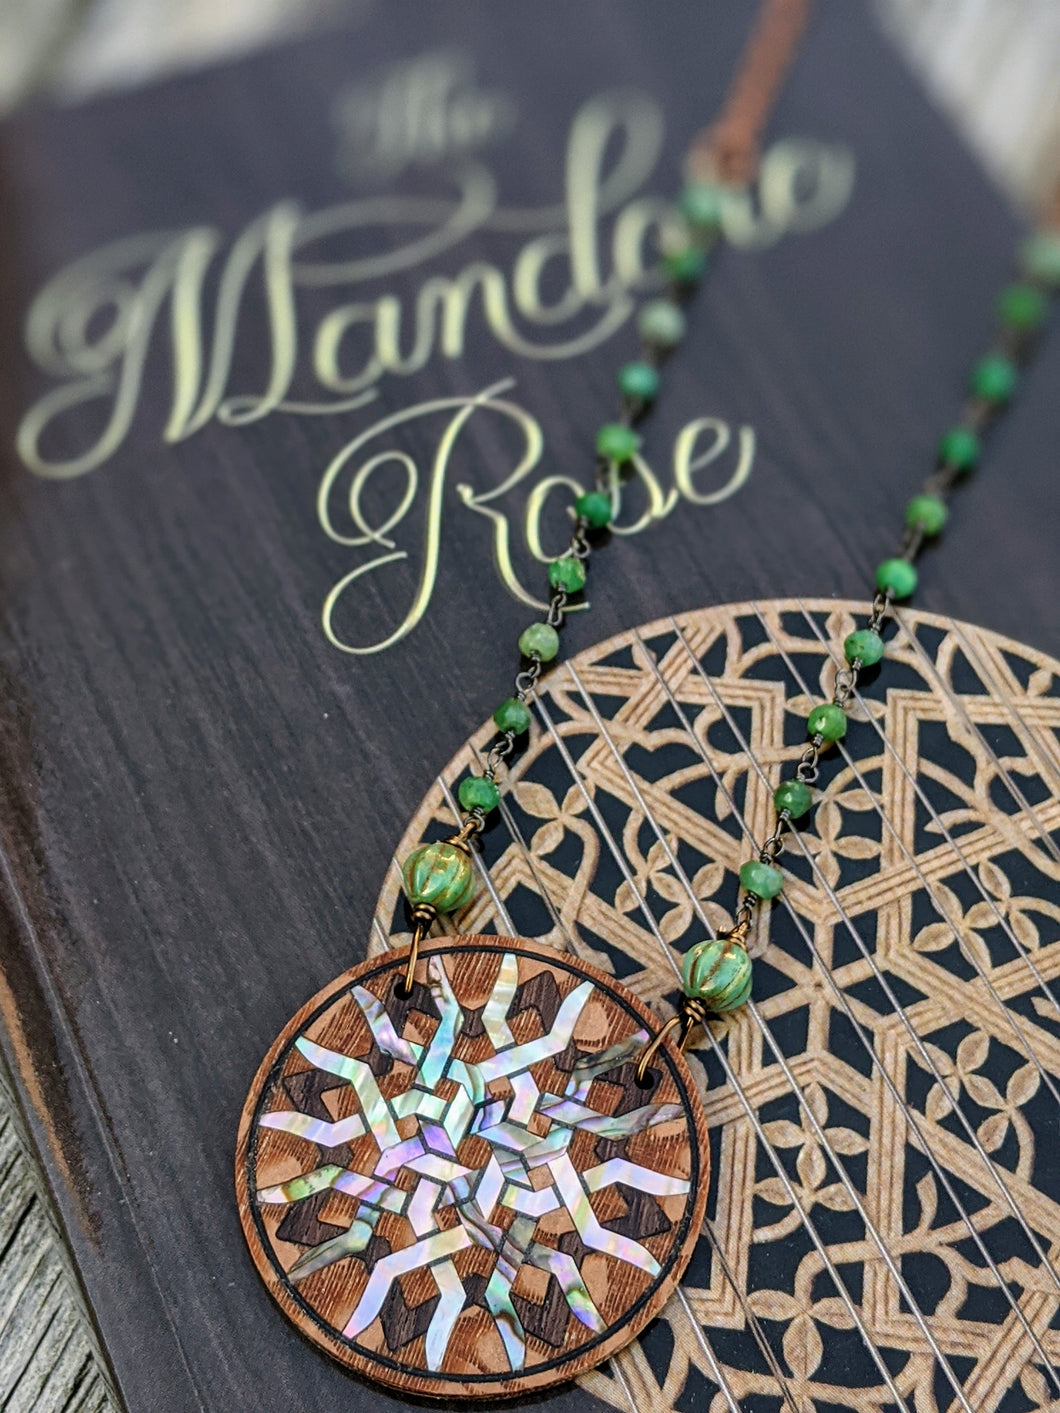 Limited Release - Mandore Rose Necklace and Signed Novel Set - 5 - Minxes' Trinkets